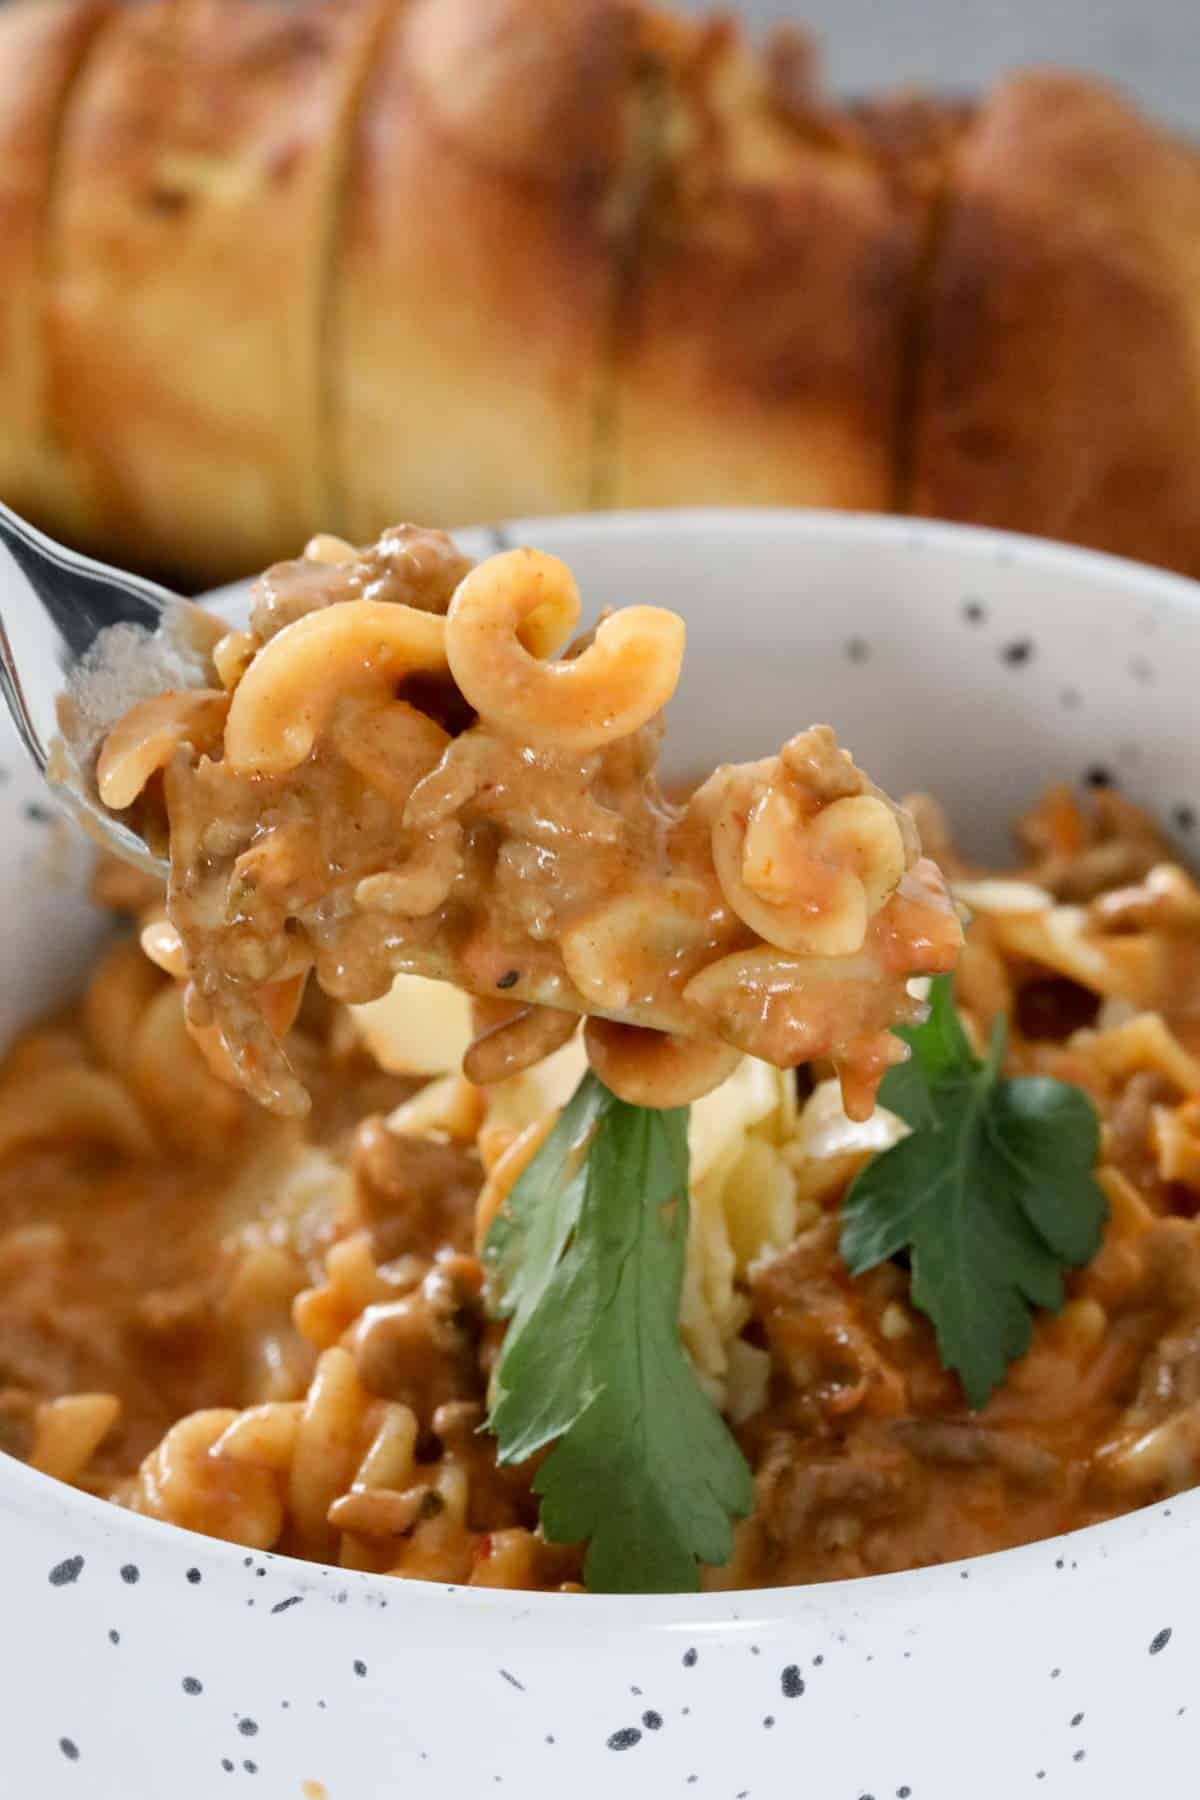 A forkful of creamy pasta and meat, held above a bowl.